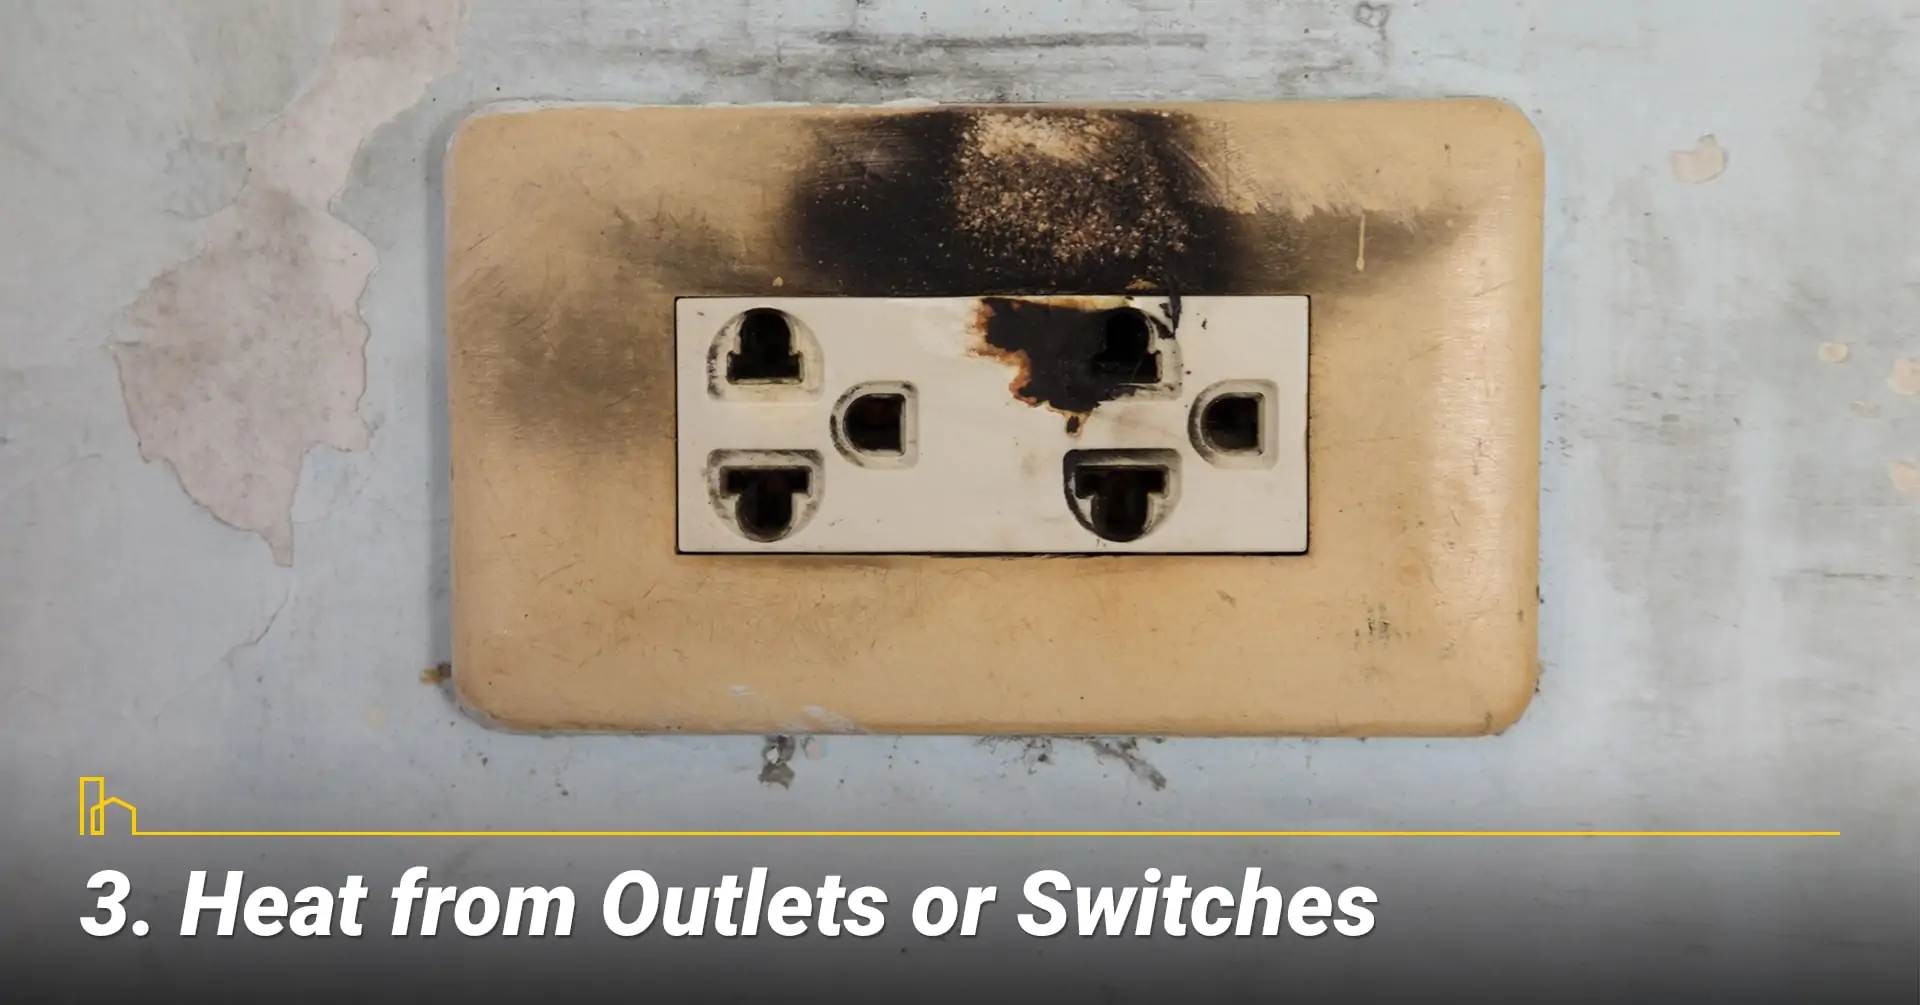 Heat from Outlets or Switches, raising temperature at outlets